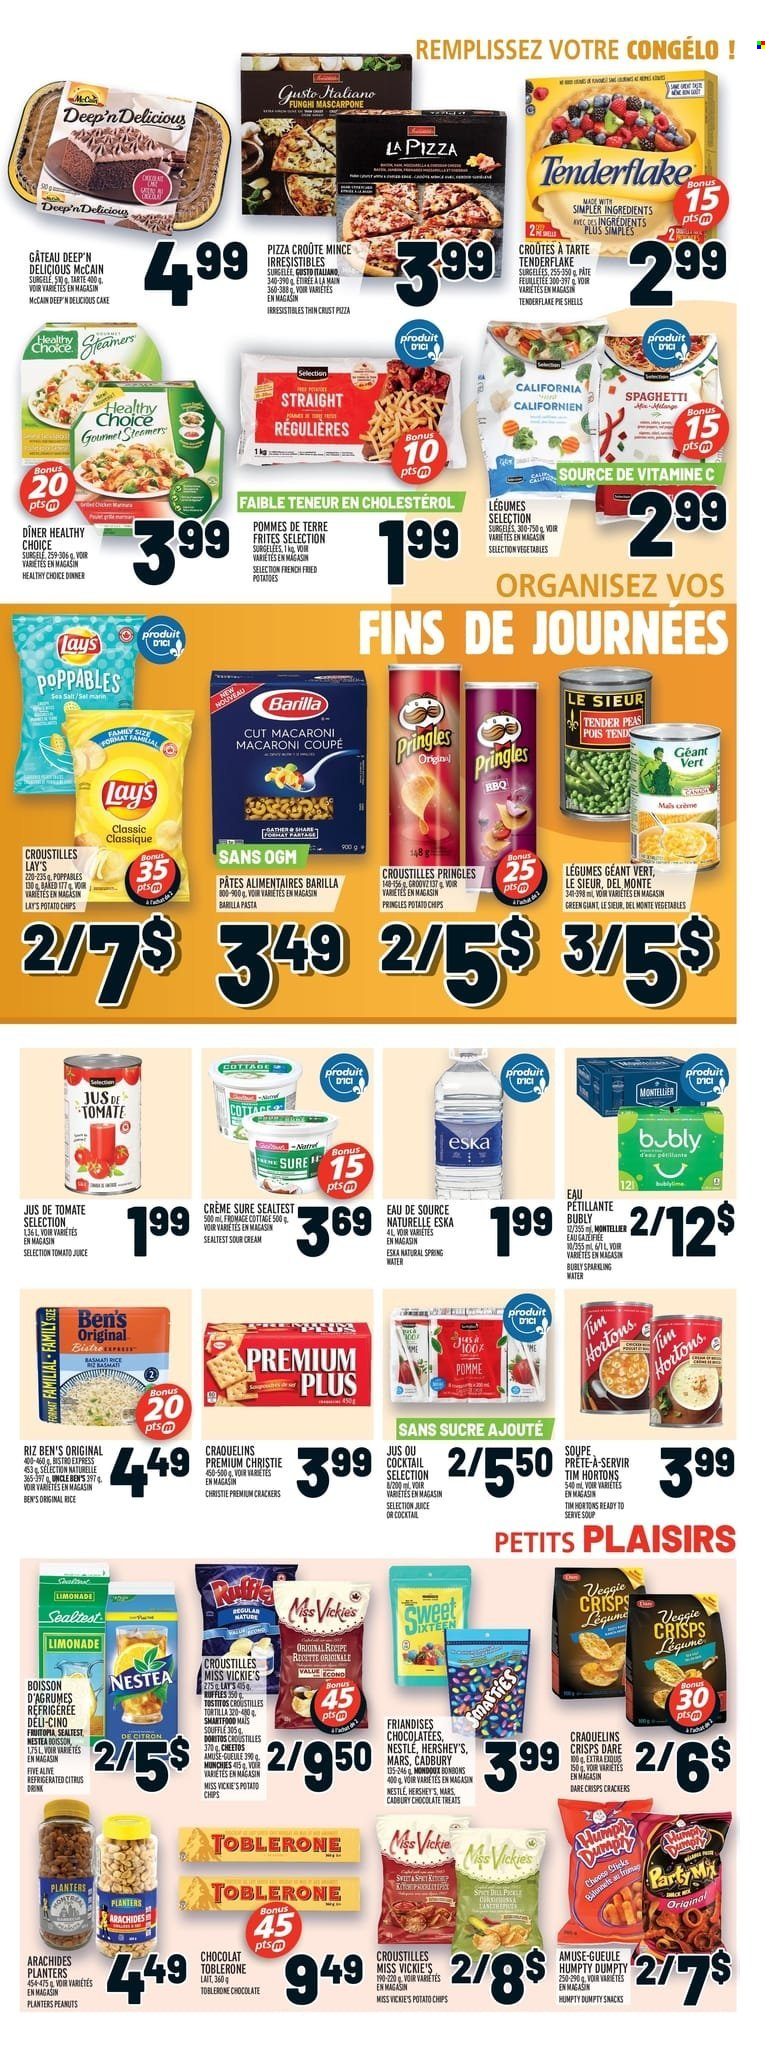 thumbnail - Metro Flyer - May 12, 2022 - May 18, 2022 - Sales products - cake, spaghetti, pizza, macaroni, soup, pasta, Healthy Choice, sour cream, Hershey's, McCain, chocolate, snack, Mars, crackers, Toblerone, Cadbury, Doritos, potato chips, Pringles, Cheetos, chips, Lay’s, Ruffles, Tostitos, Uncle Ben's, rice, peanuts, Planters, juice, spring water, Sure, mascarpone, Nestlé, Barilla. Page 10.